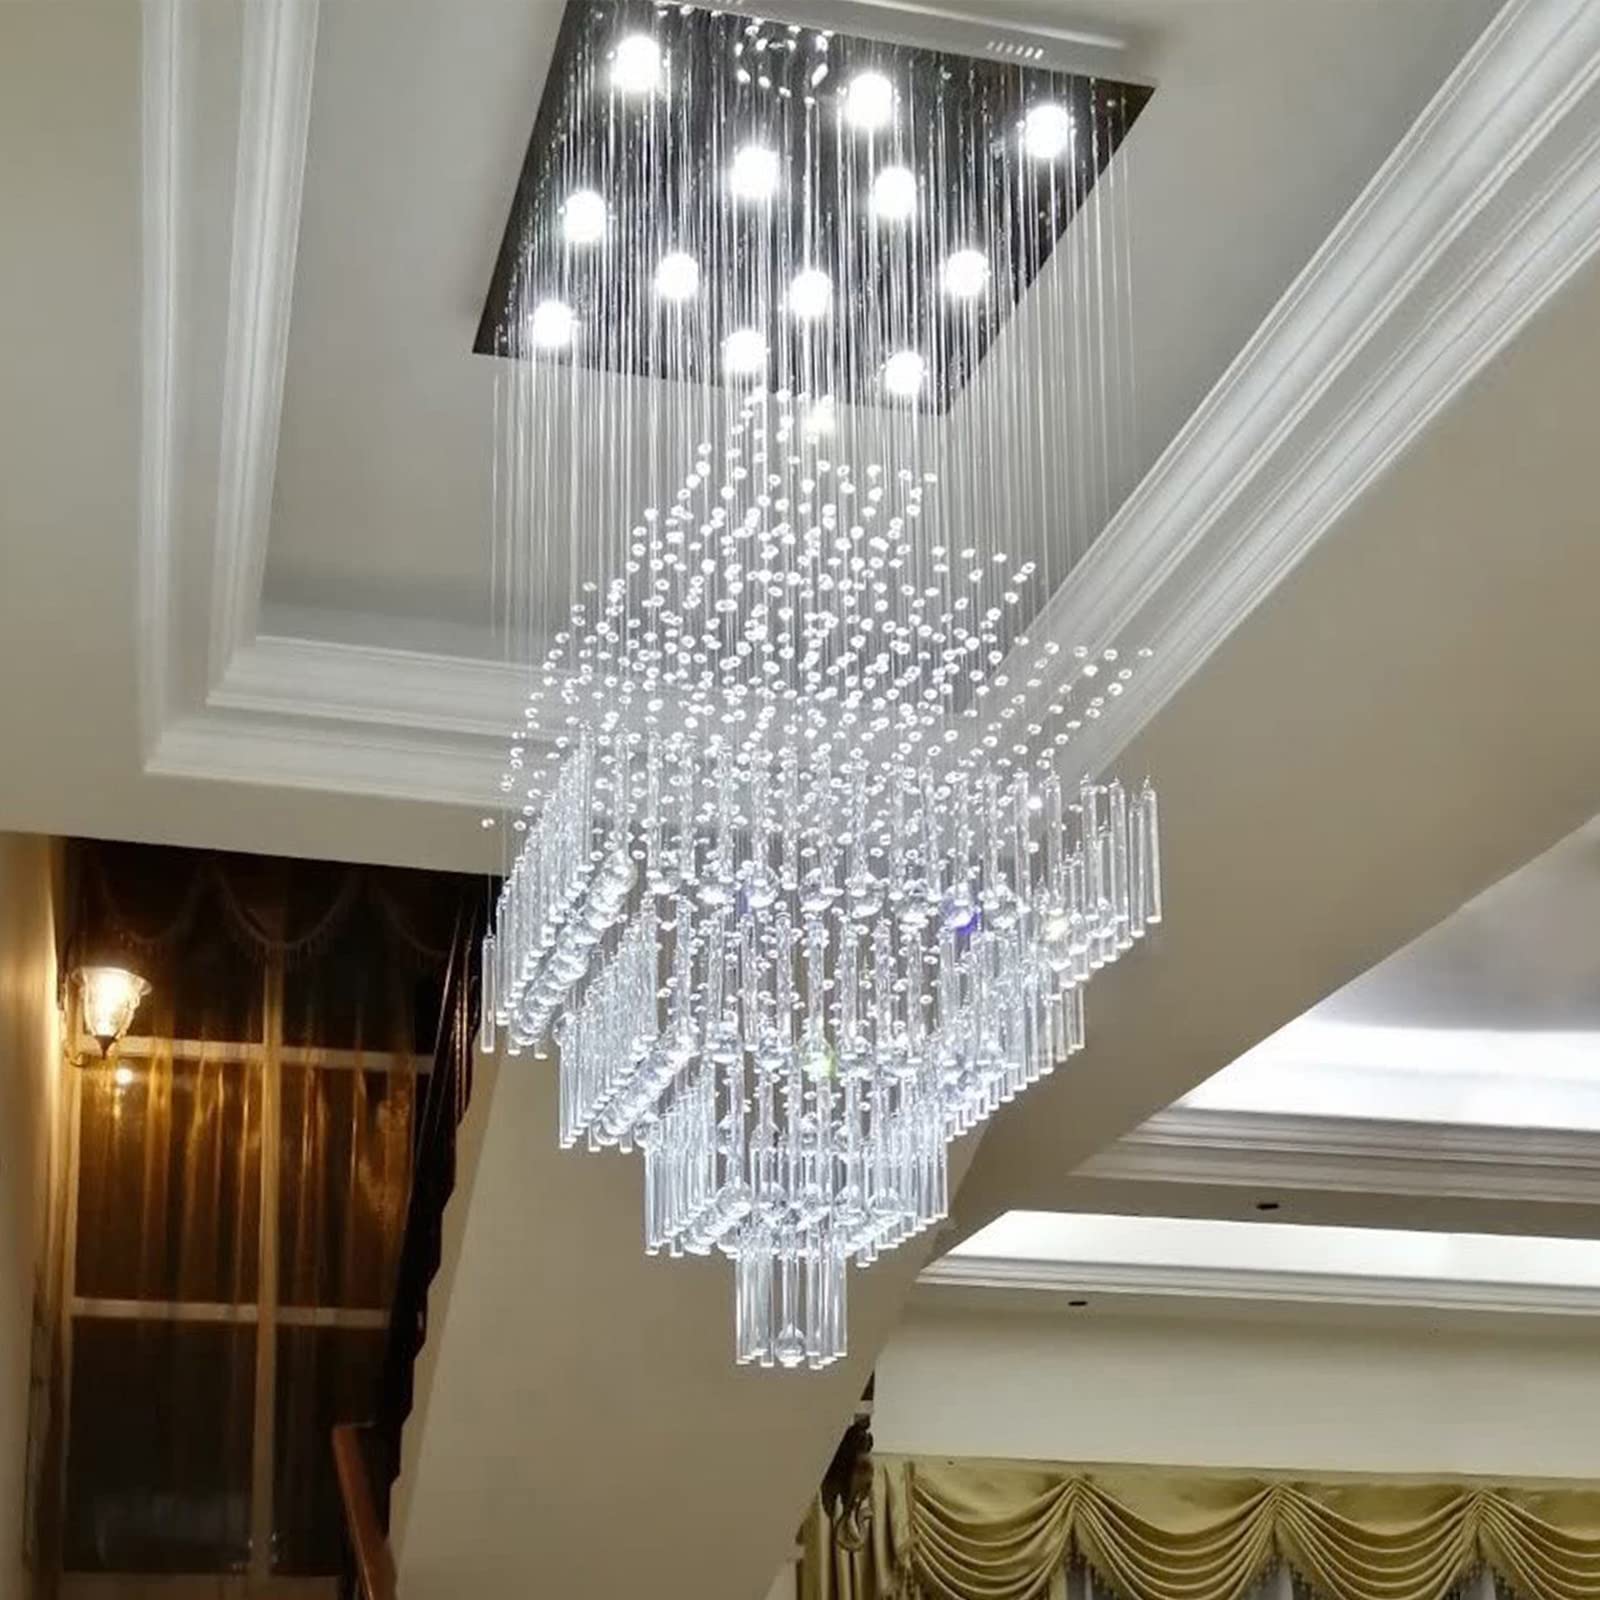 7PM Foyer chandeliers Entryway High ceiling, 12-Light Square Raindrop crystal chandeliers, Flush Mount ceiling Light Fixtures, D